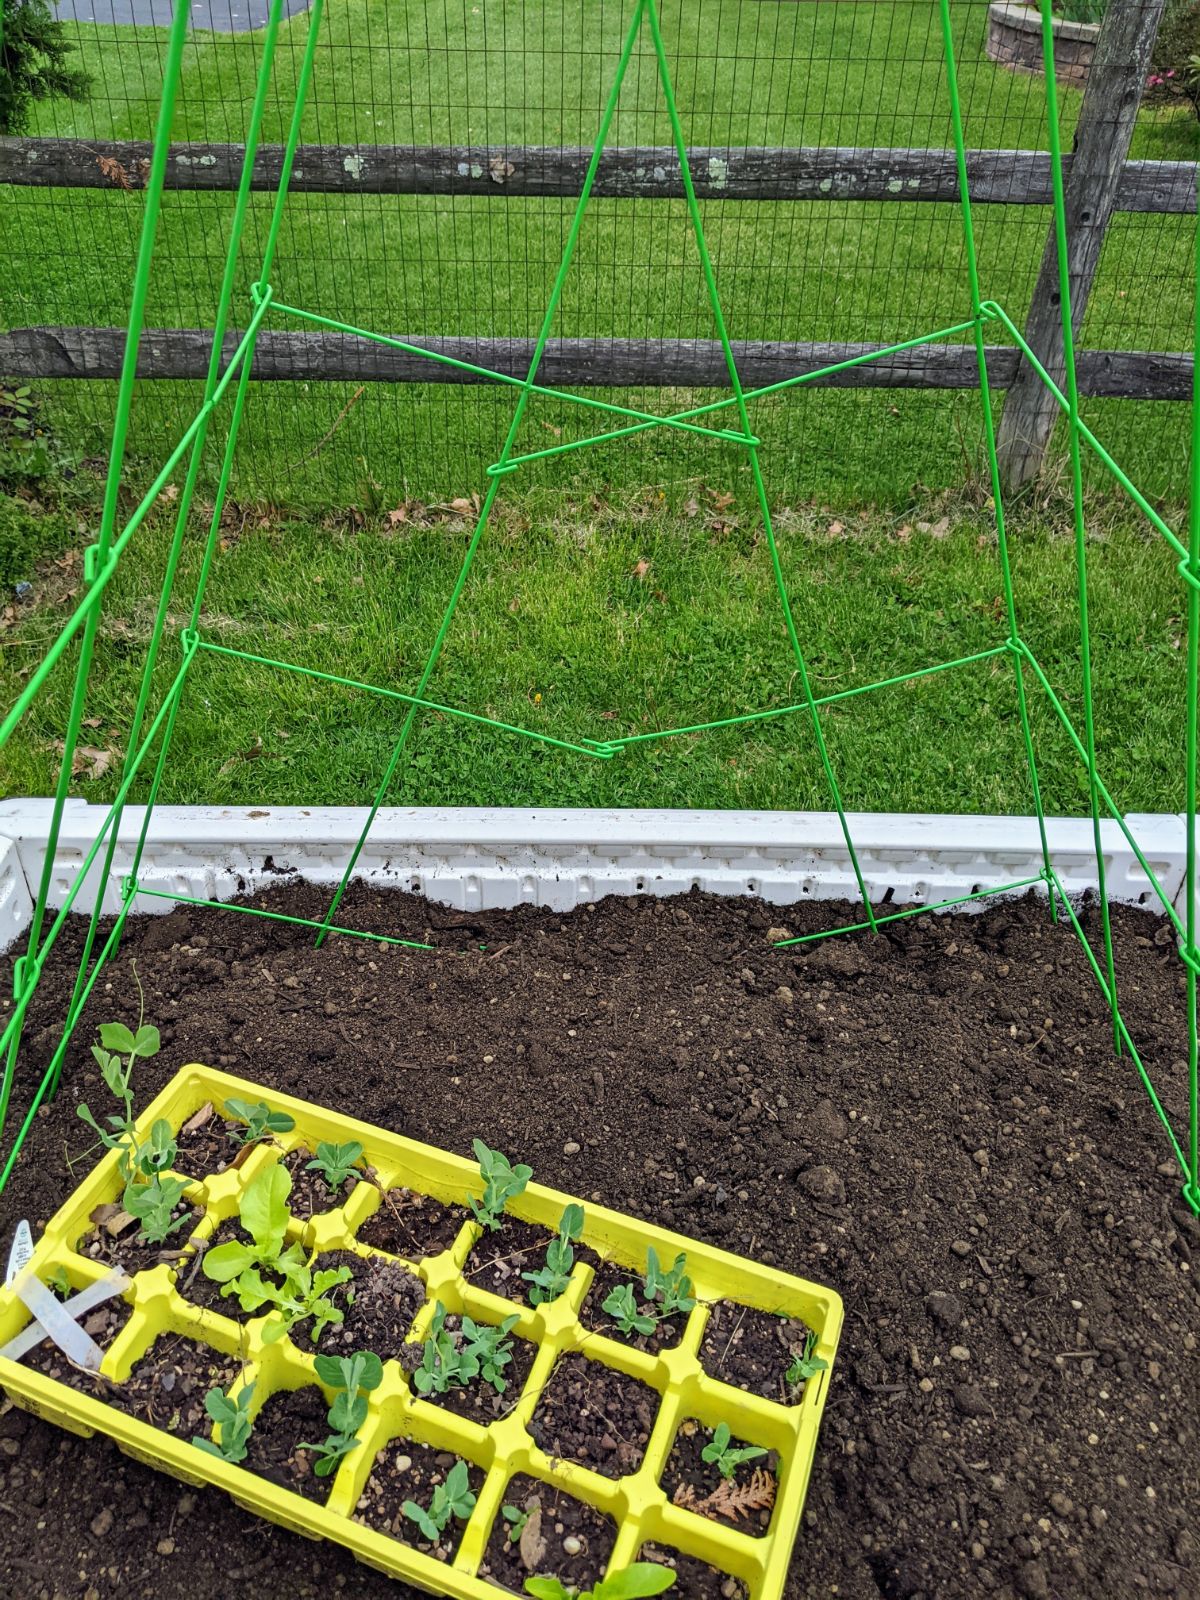 Snow peas ready to plant in a raised bed with a green trellis